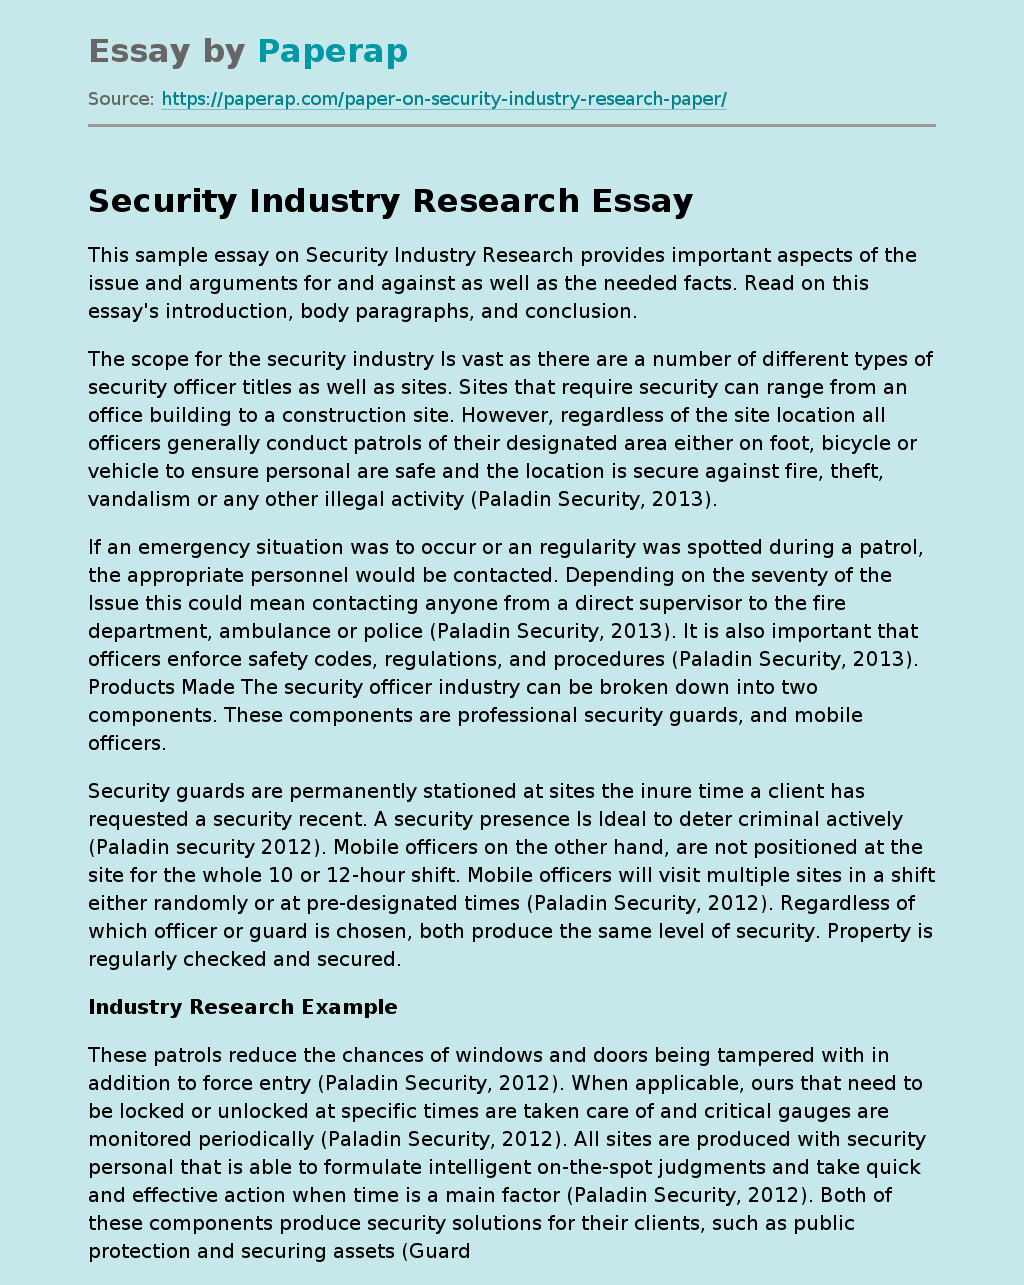 Sample Essay on Security Industry Research